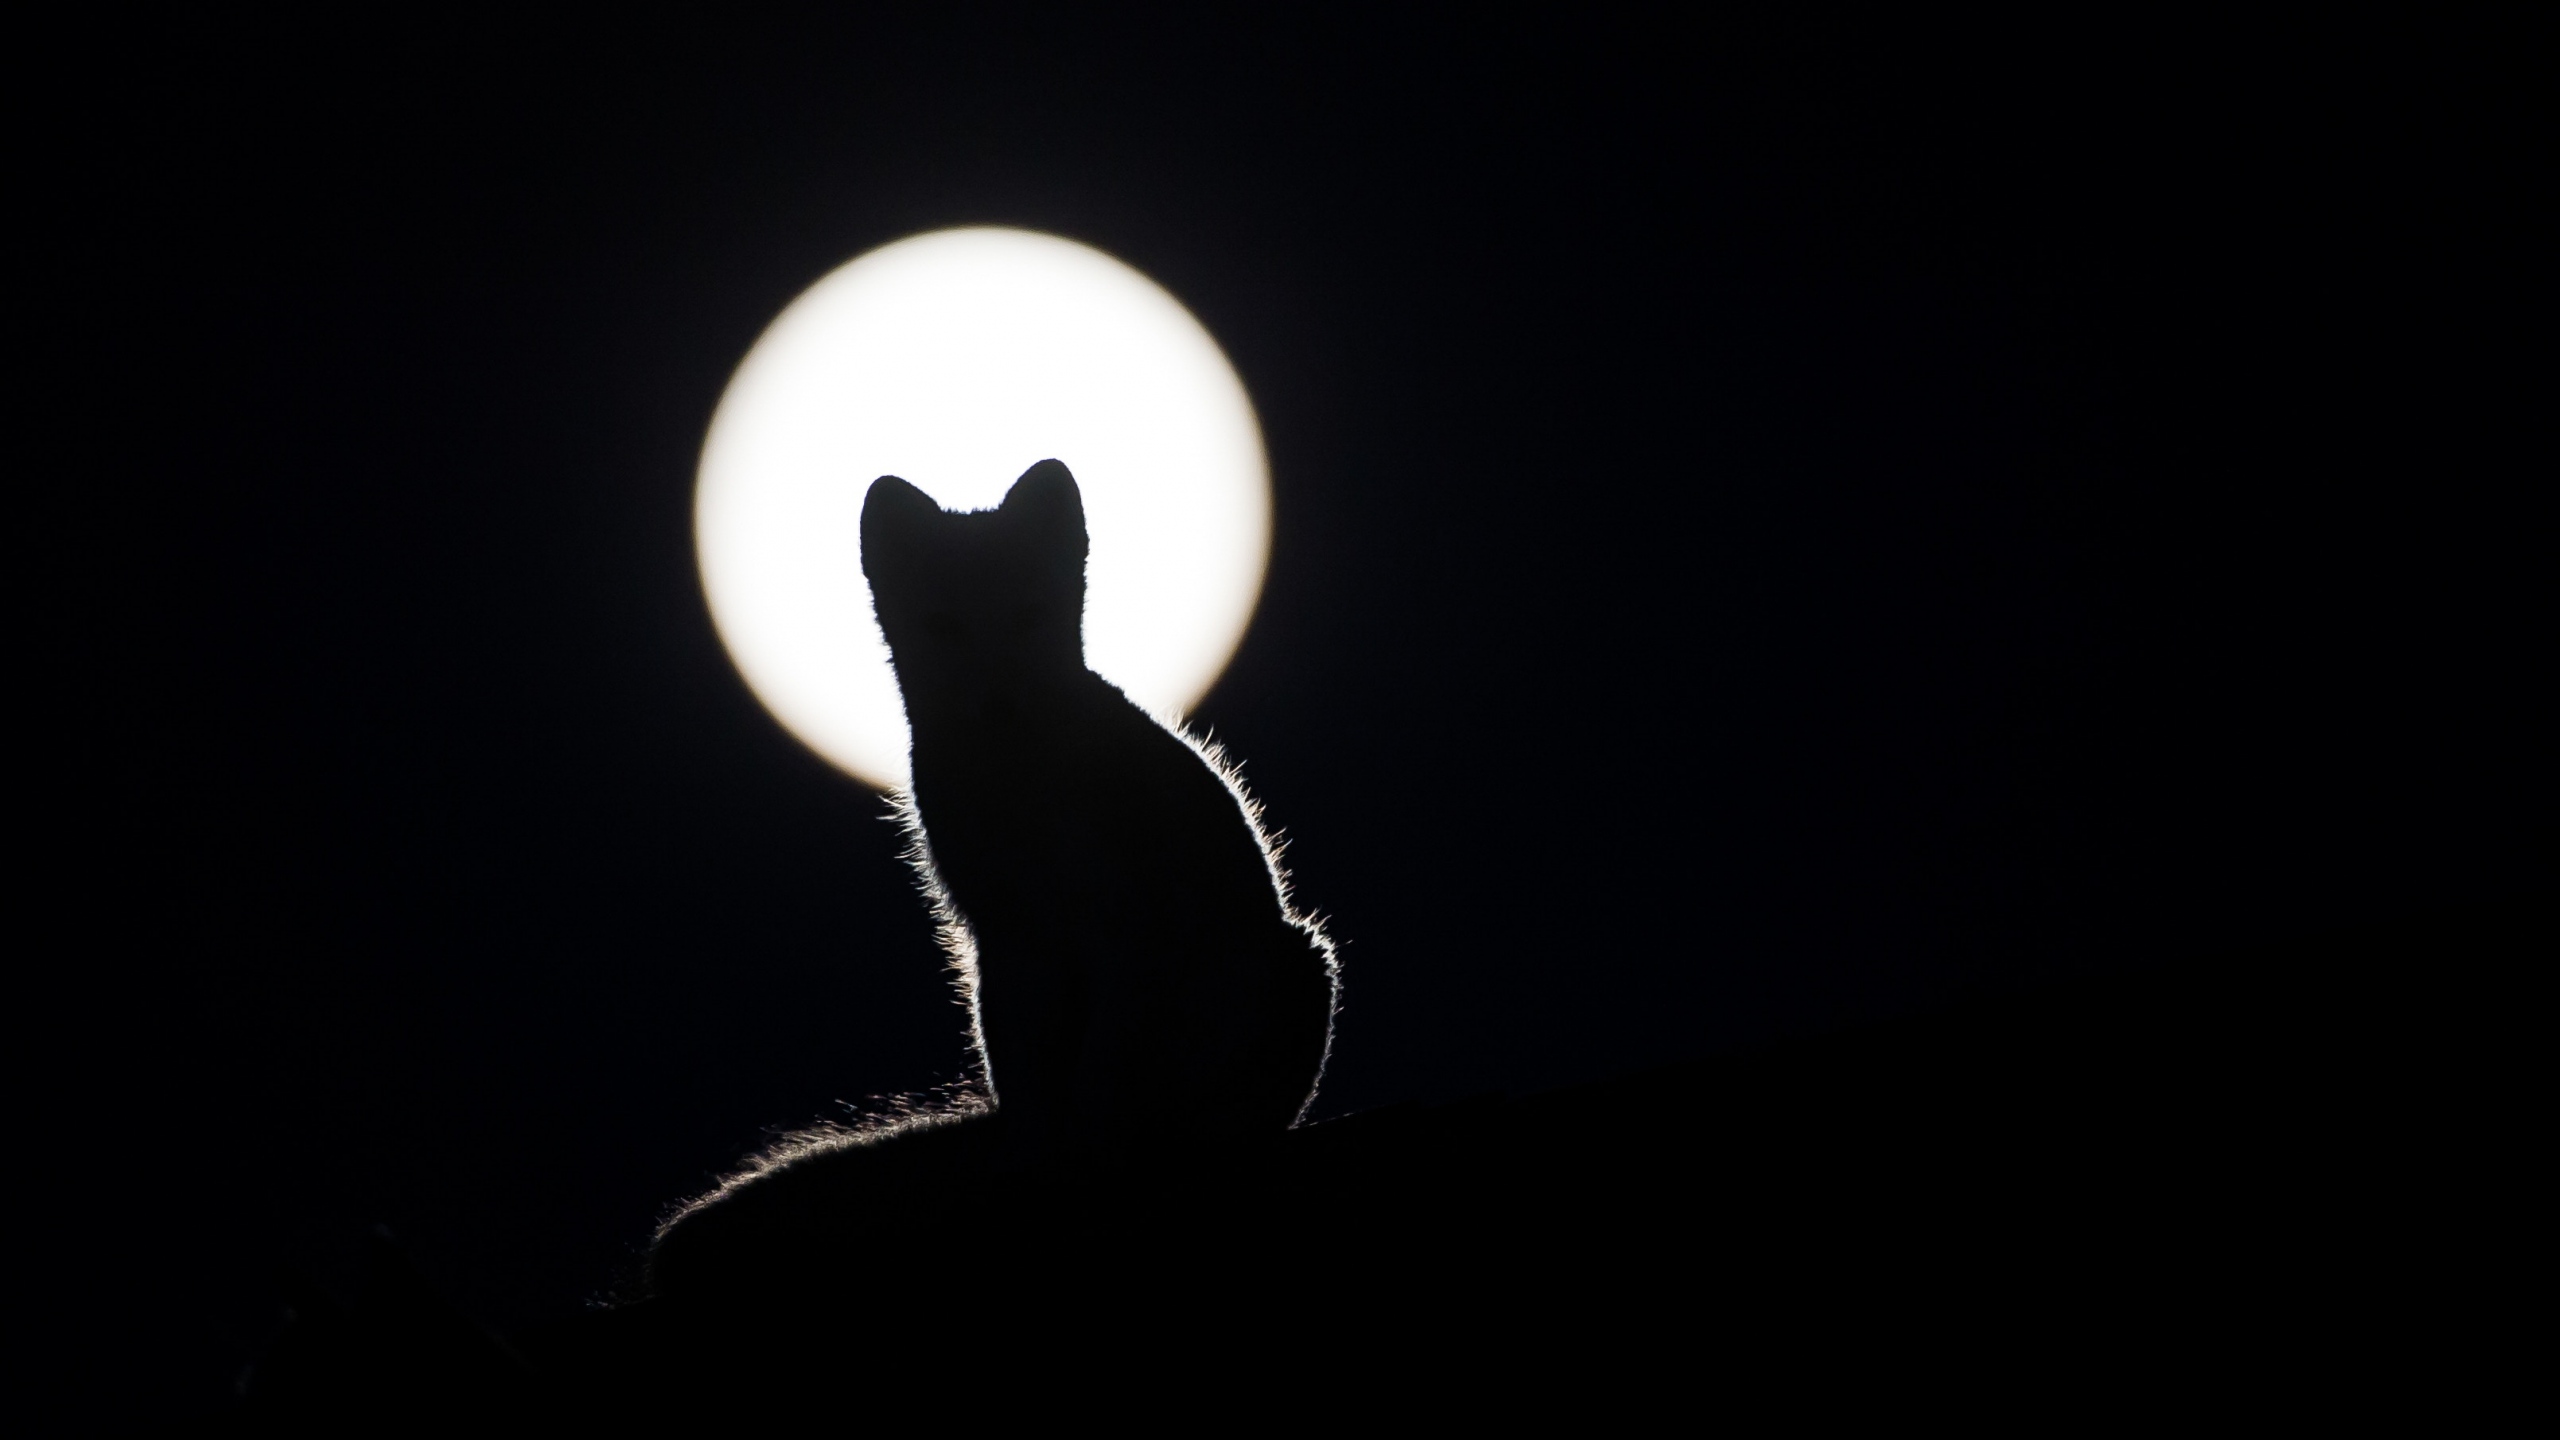 Wallpaper of Cat Silhouettes Kitten Moon background HD image